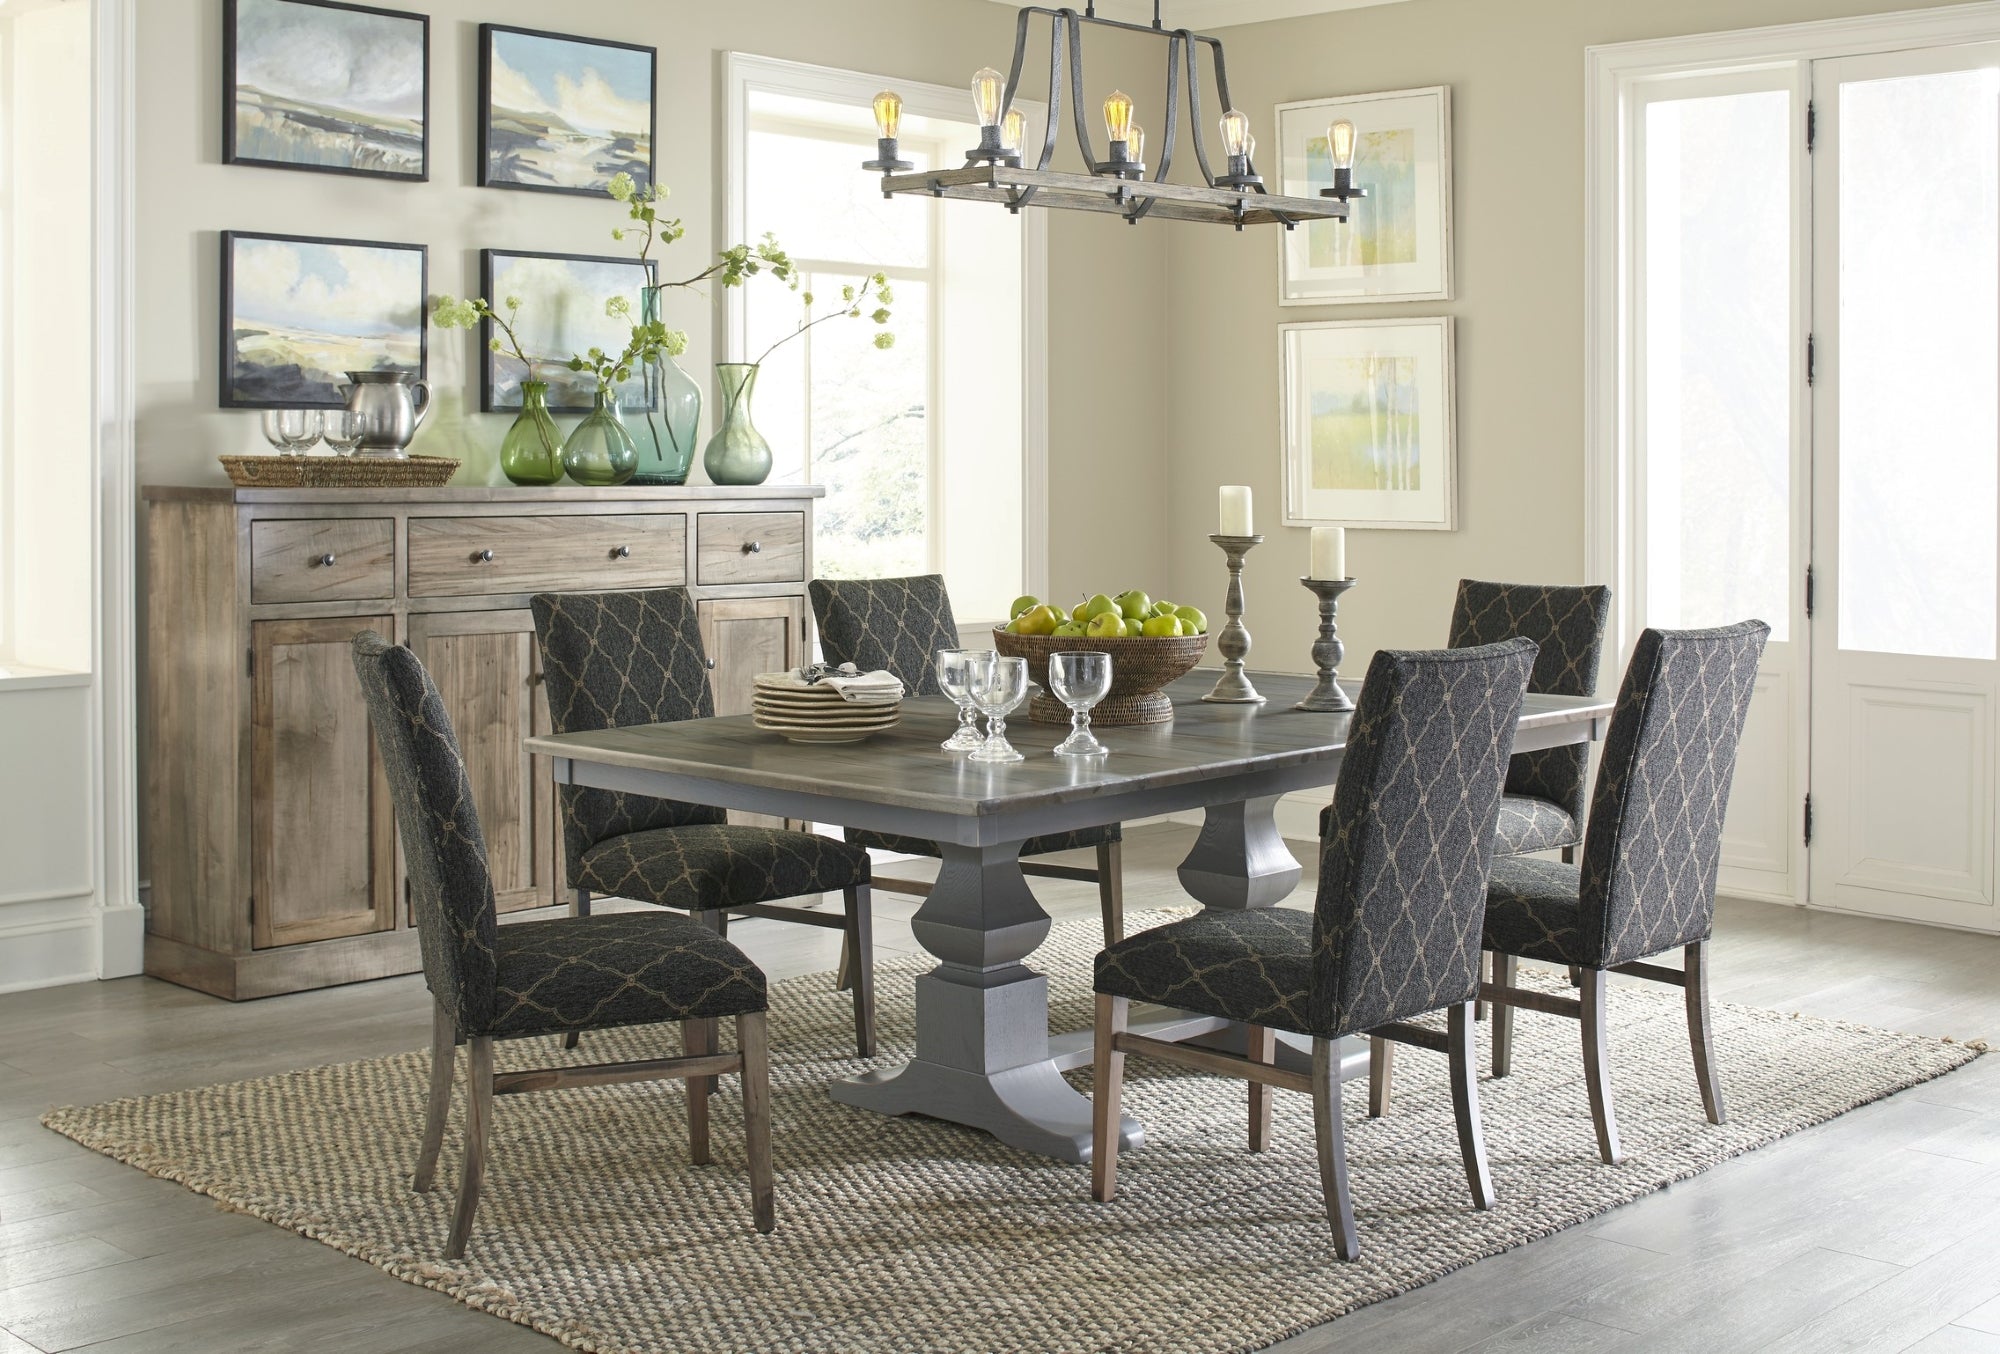 Dining room with a large rectangle dining table surrounded by fabric dining chairs